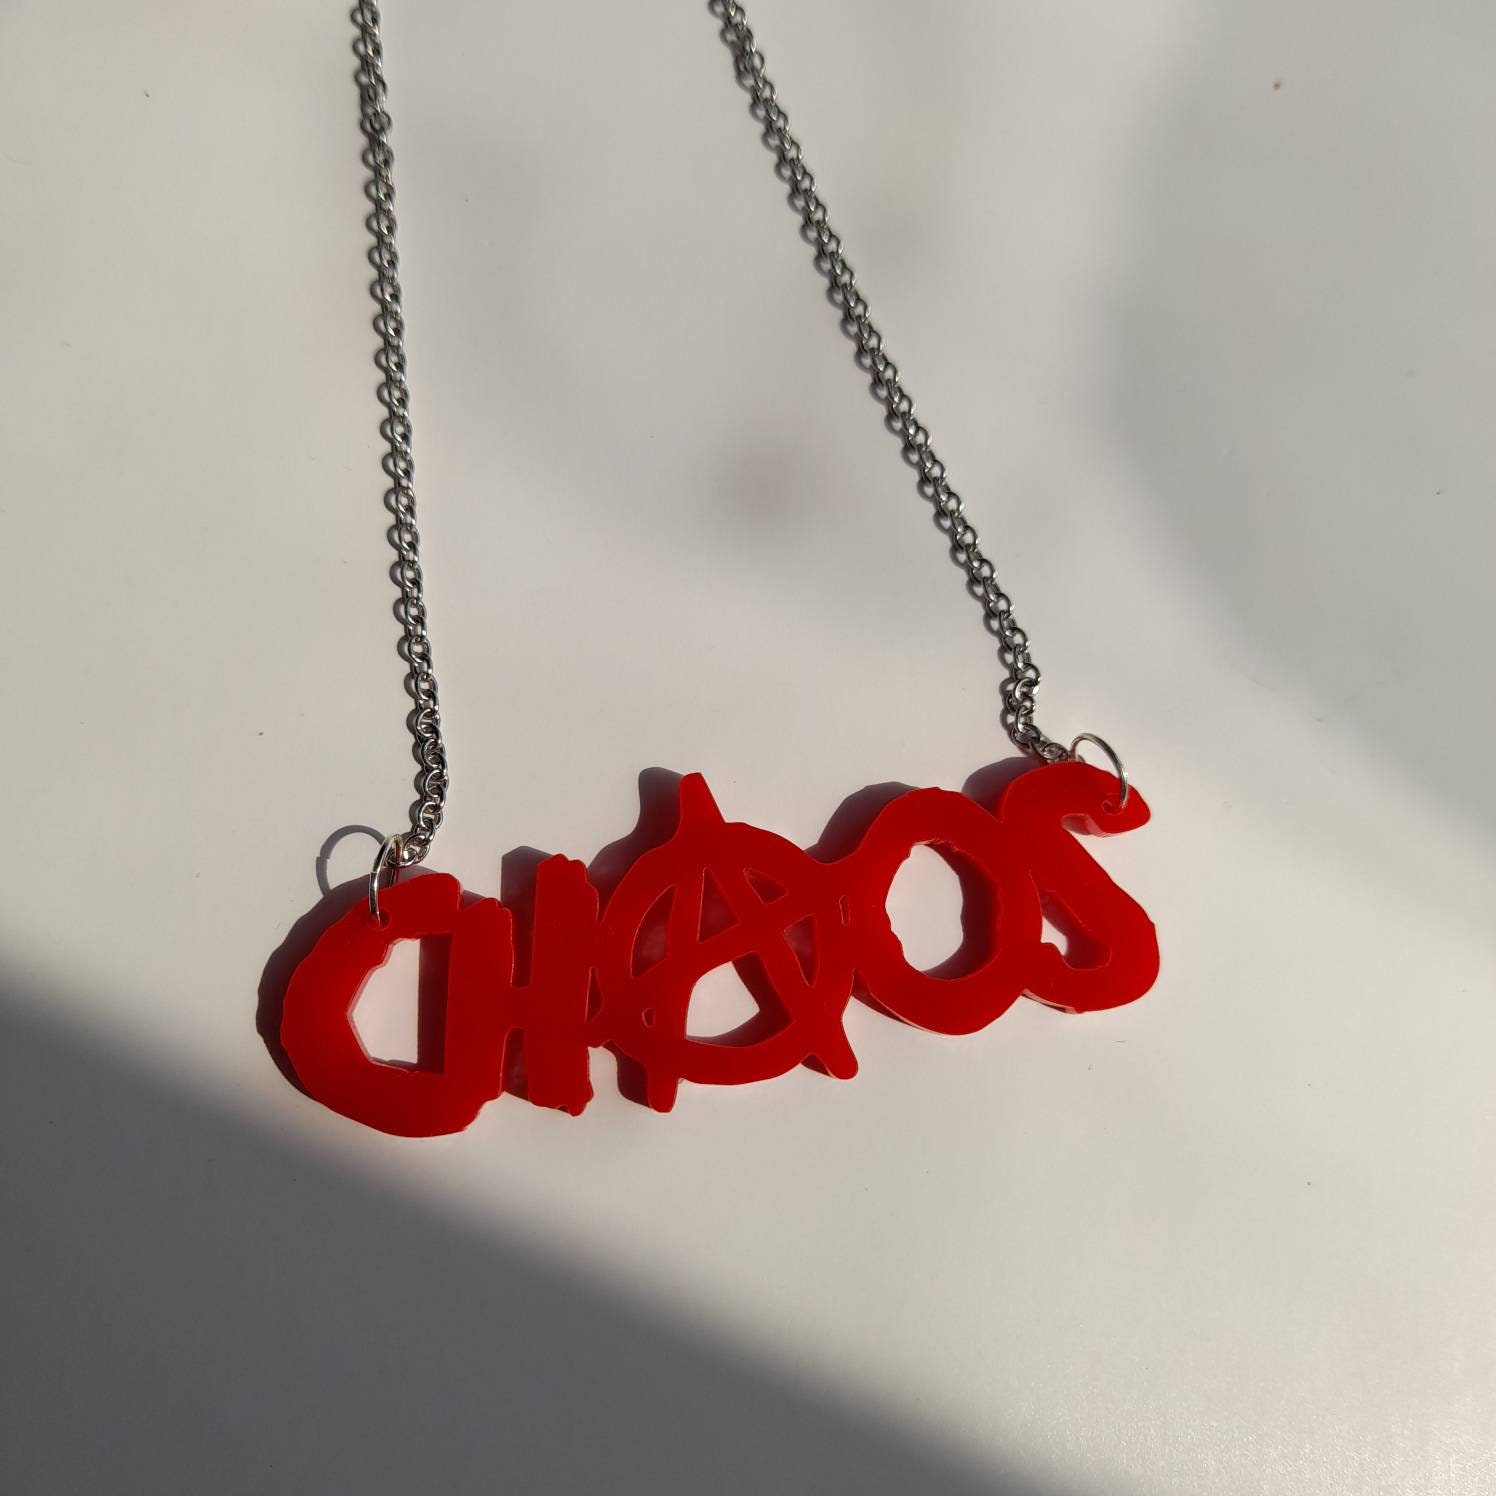 Chaos Anarchy Necklace / punk anarchist acrylic jewellery